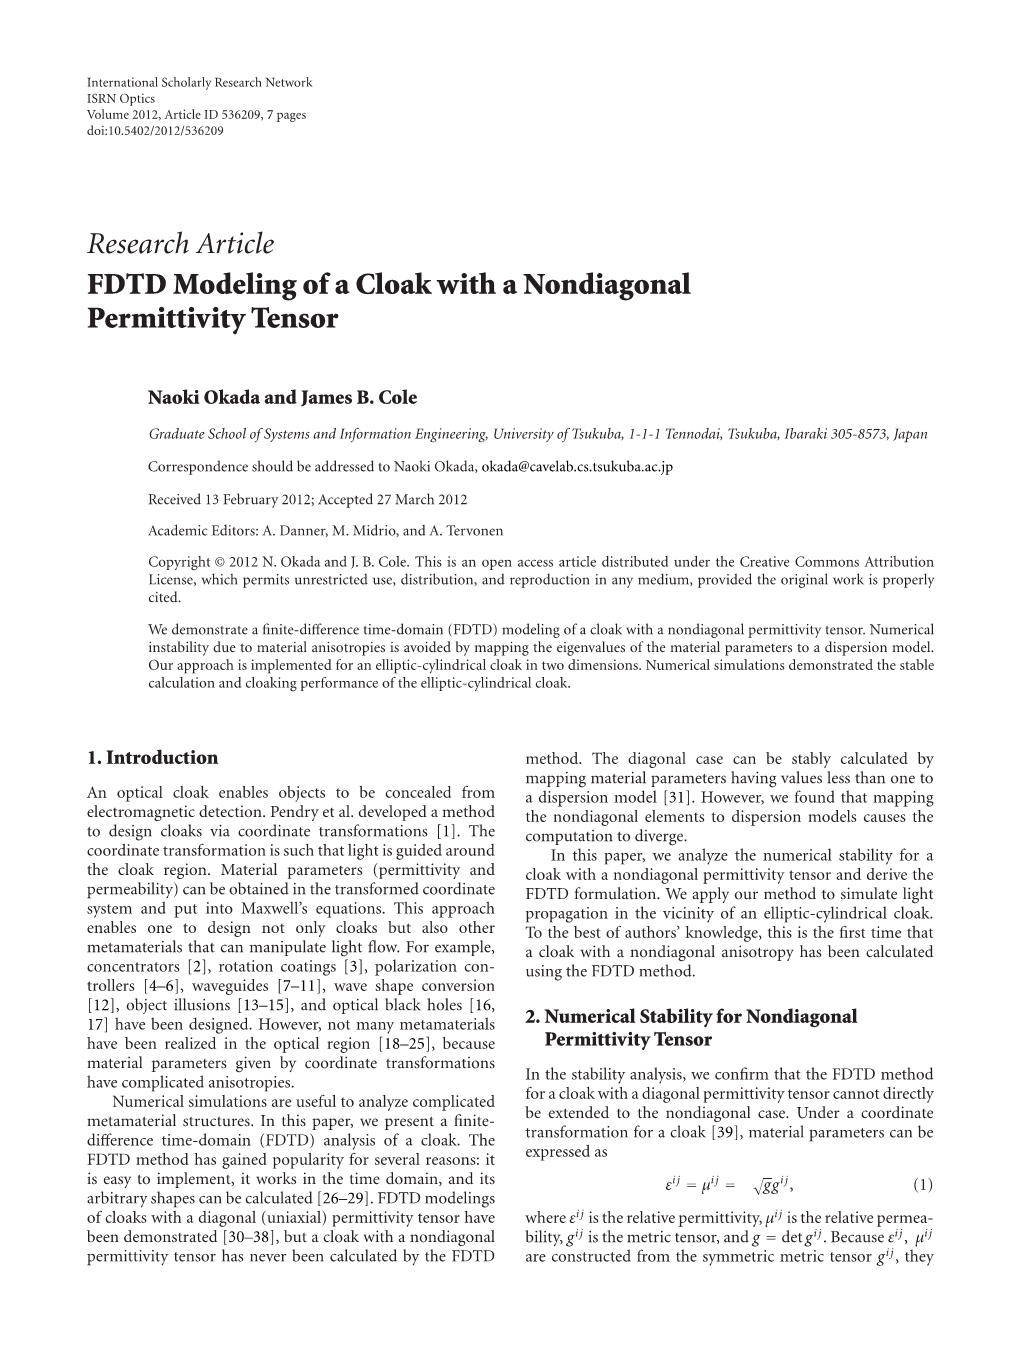 Research Article FDTD Modeling of a Cloak with a Nondiagonal Permittivity Tensor